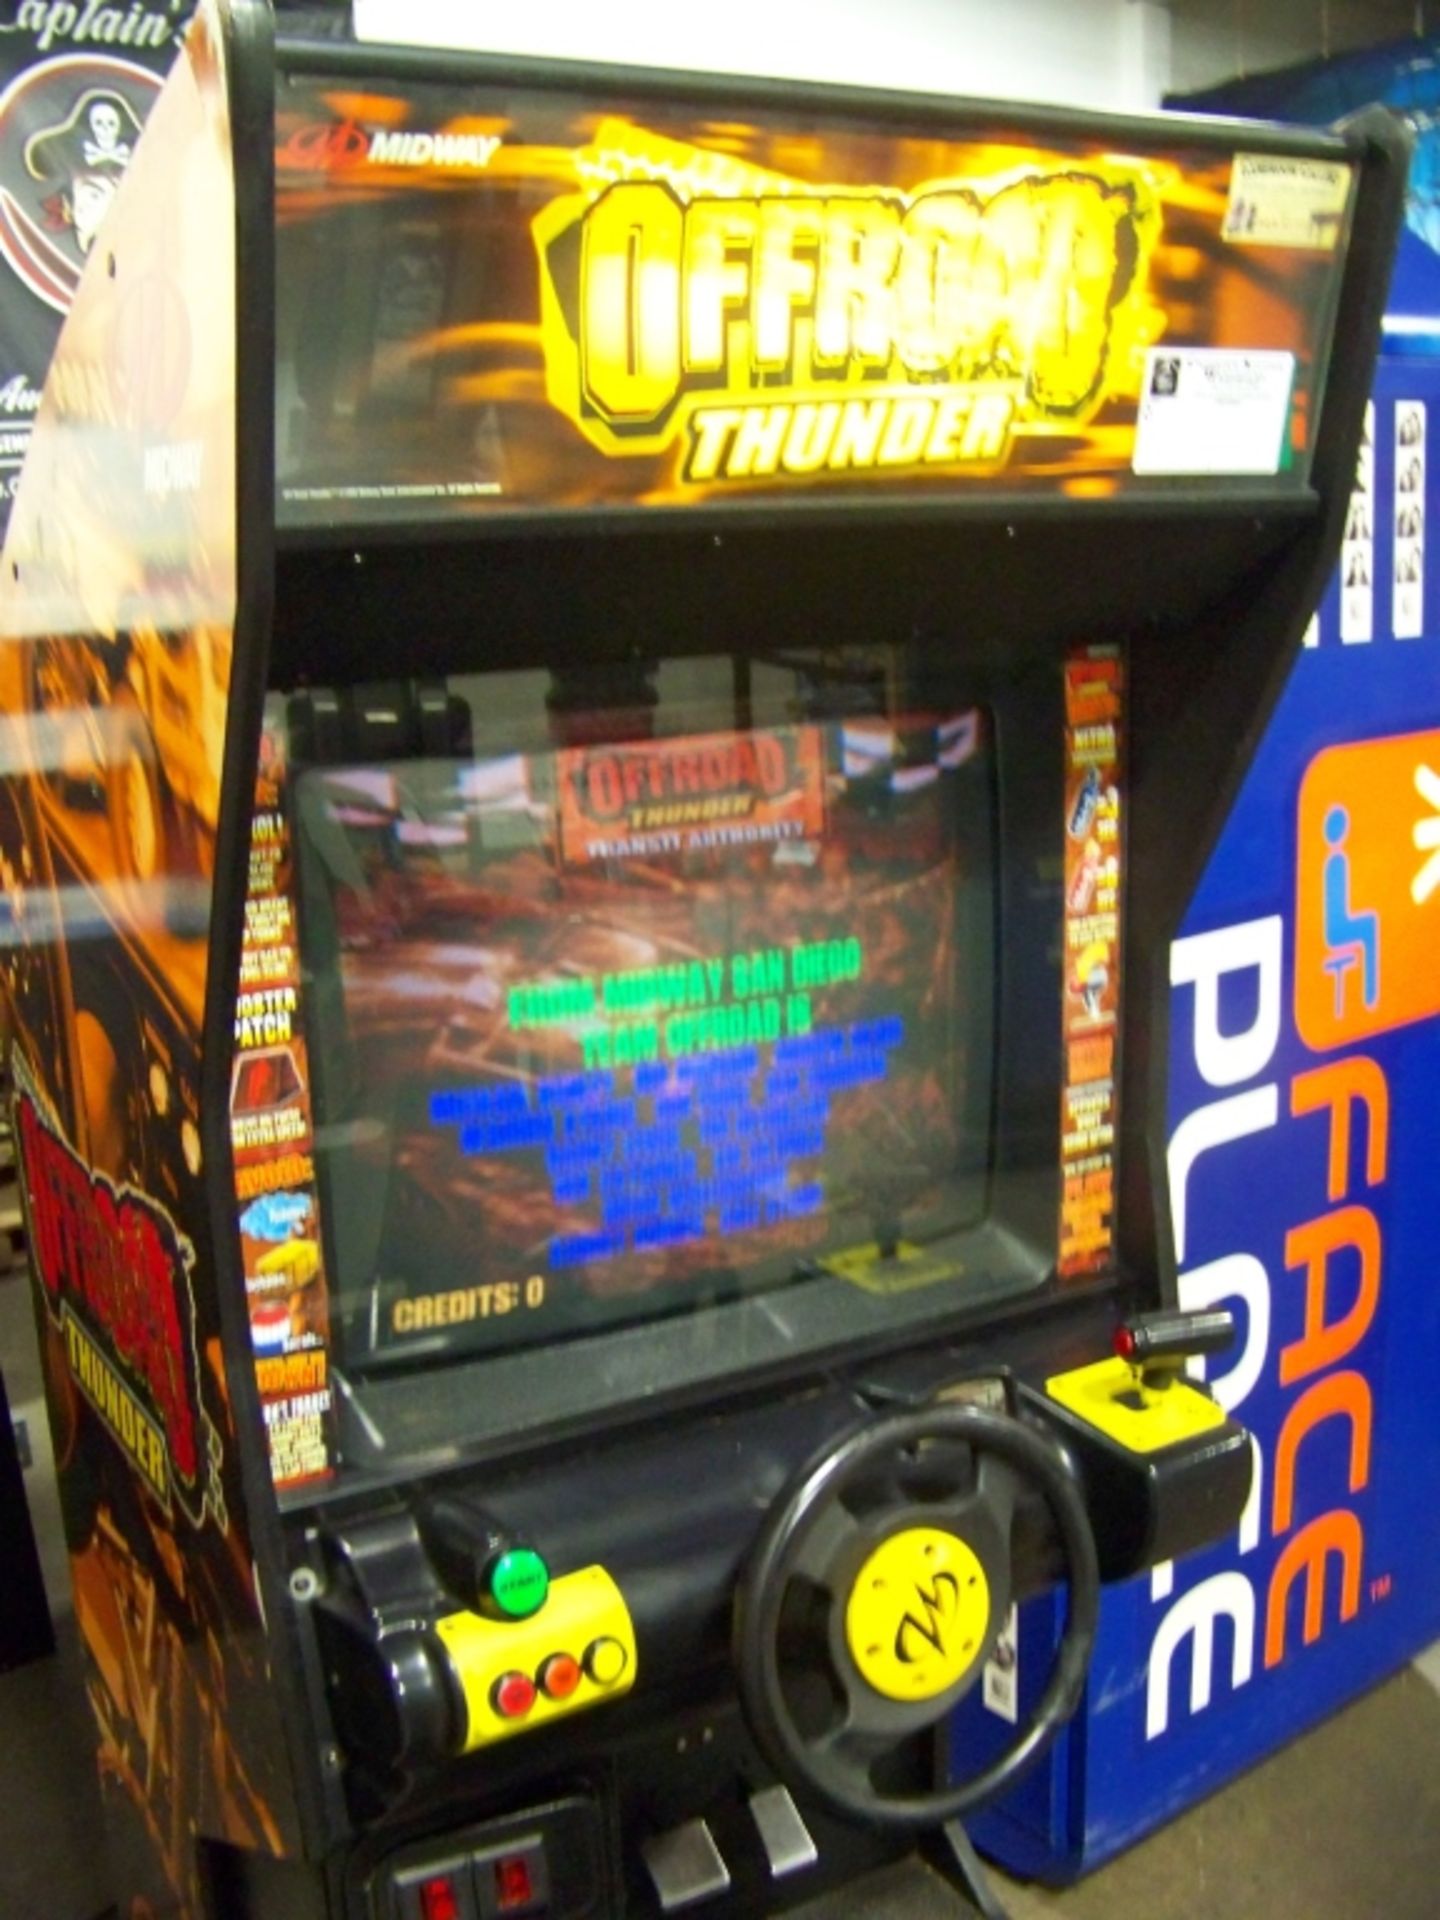 OFFROAD THUNDER RACING ARCADE GAME - Image 5 of 6